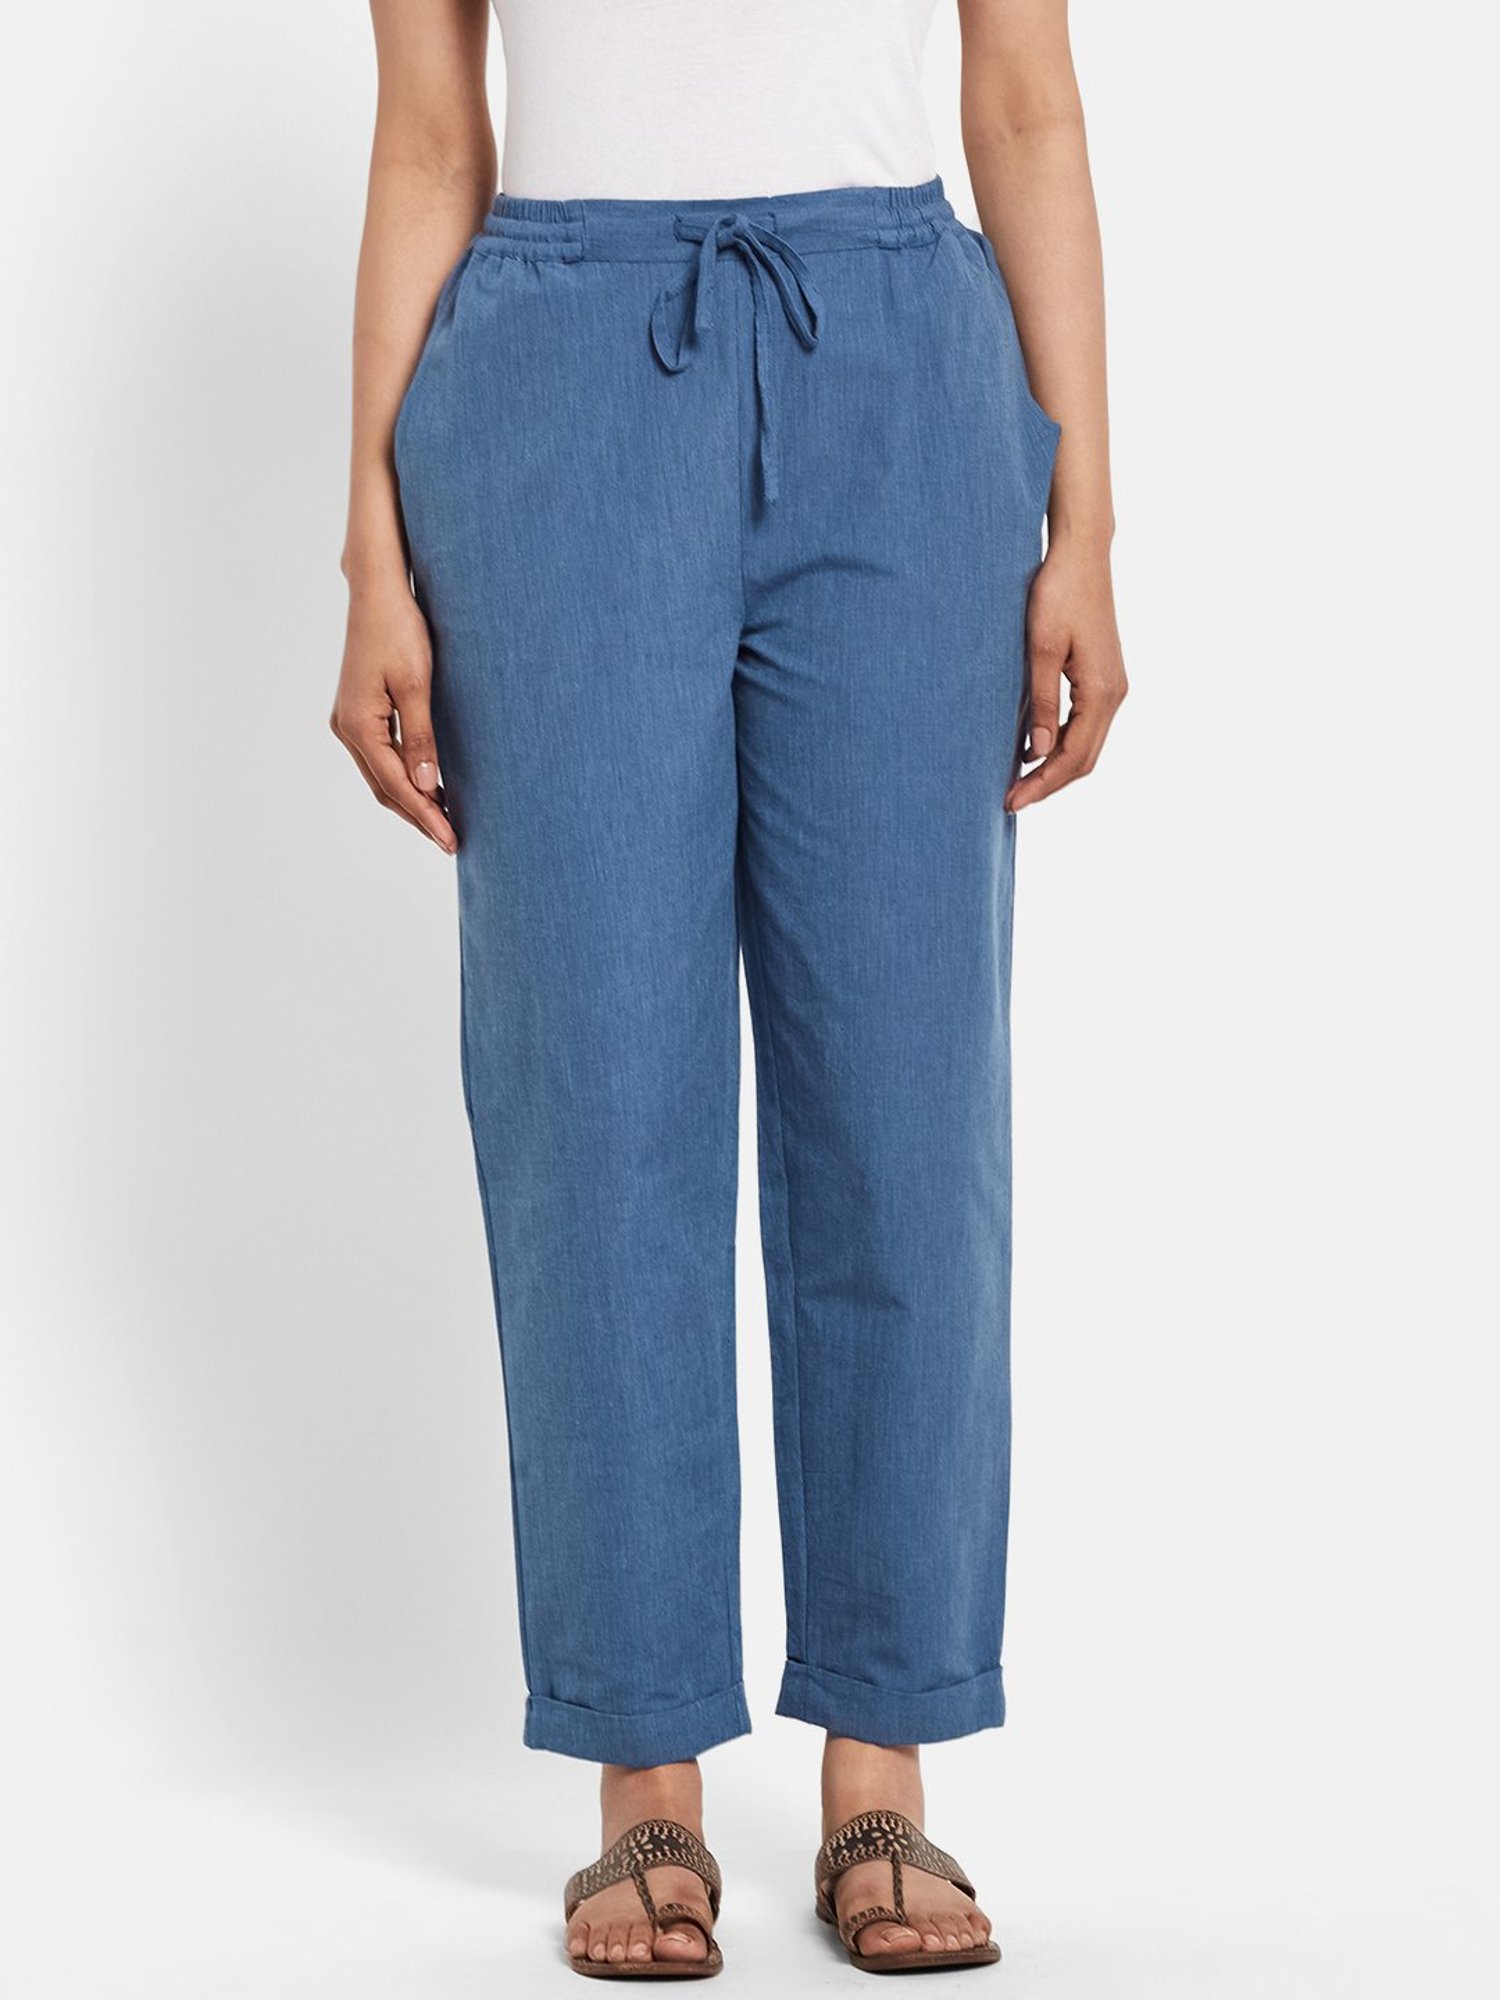 Fabindia Women Mid-Rise Cotton Trousers Price in India, Full Specifications  & Offers | DTashion.com